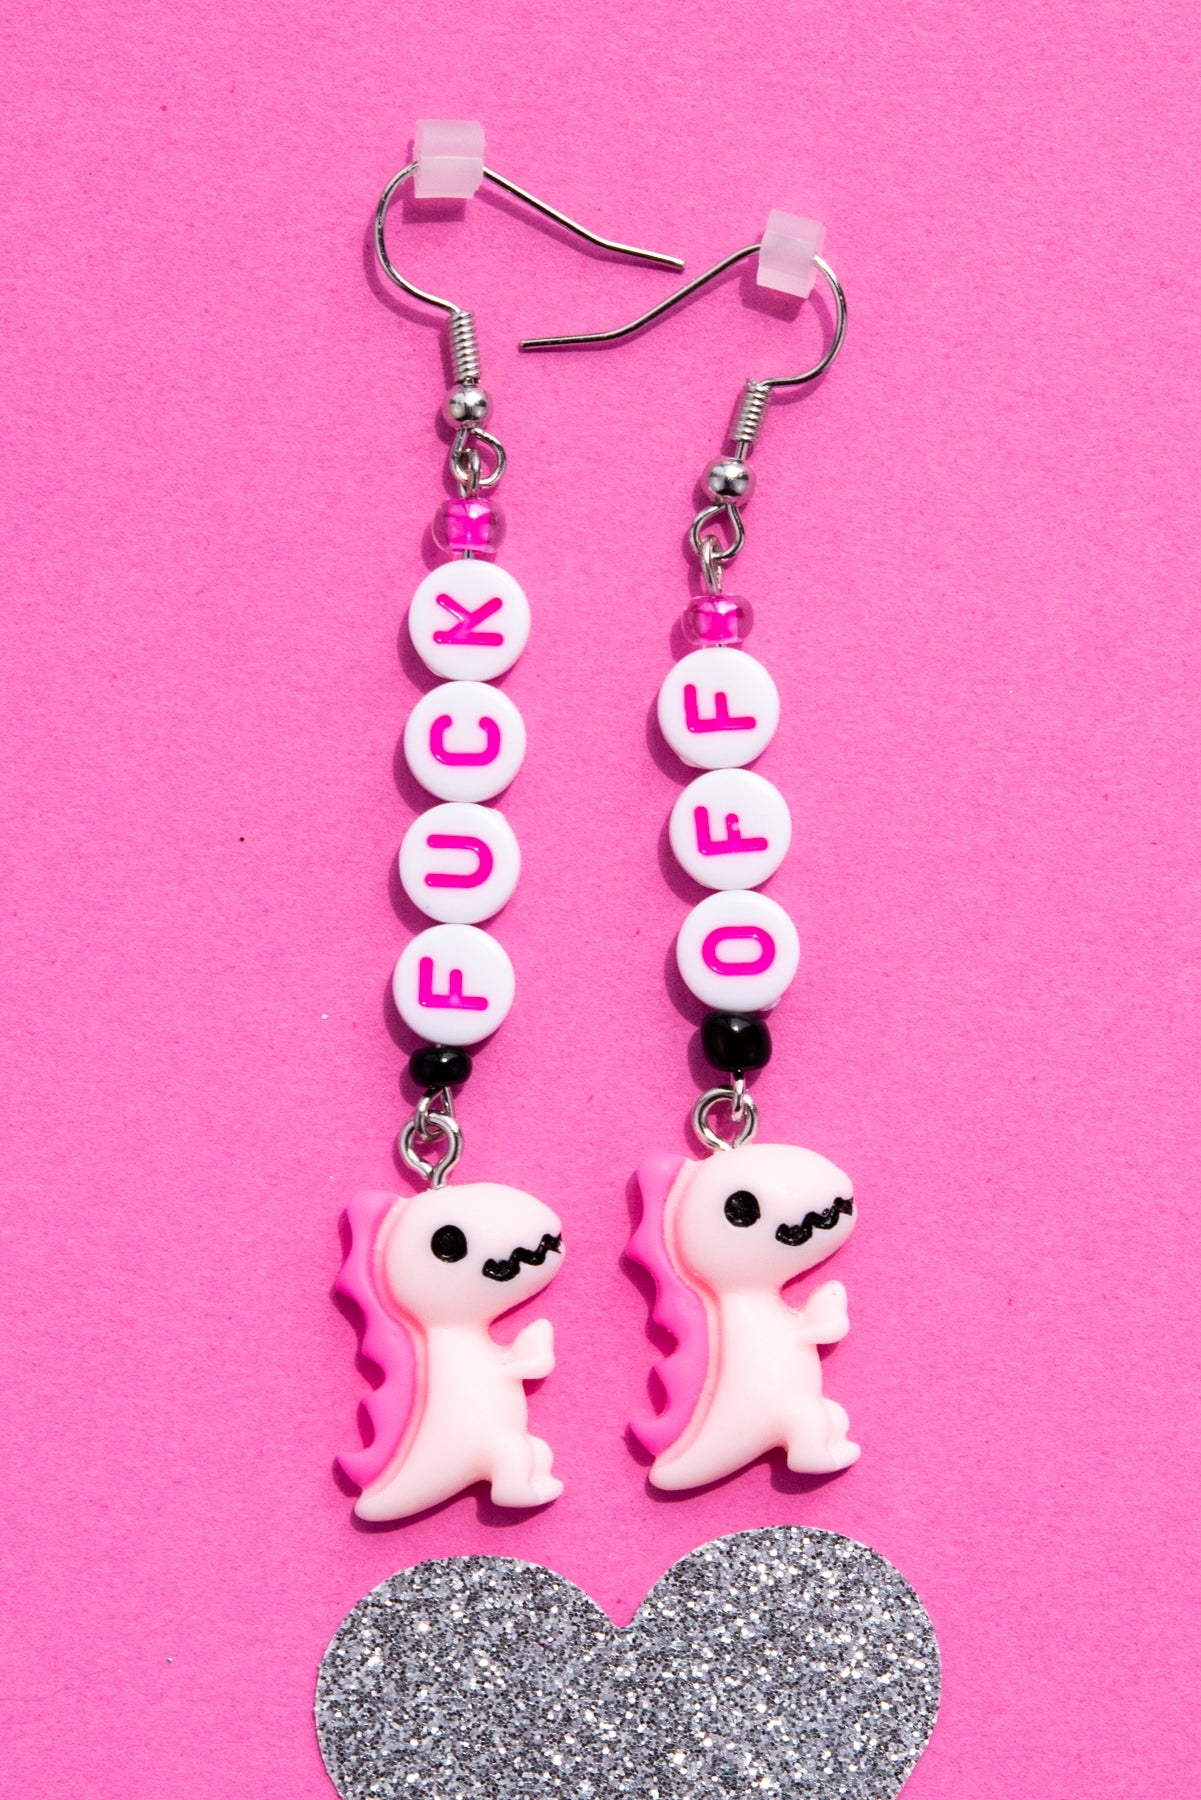 Fuck Off Earrings - Dino Charms